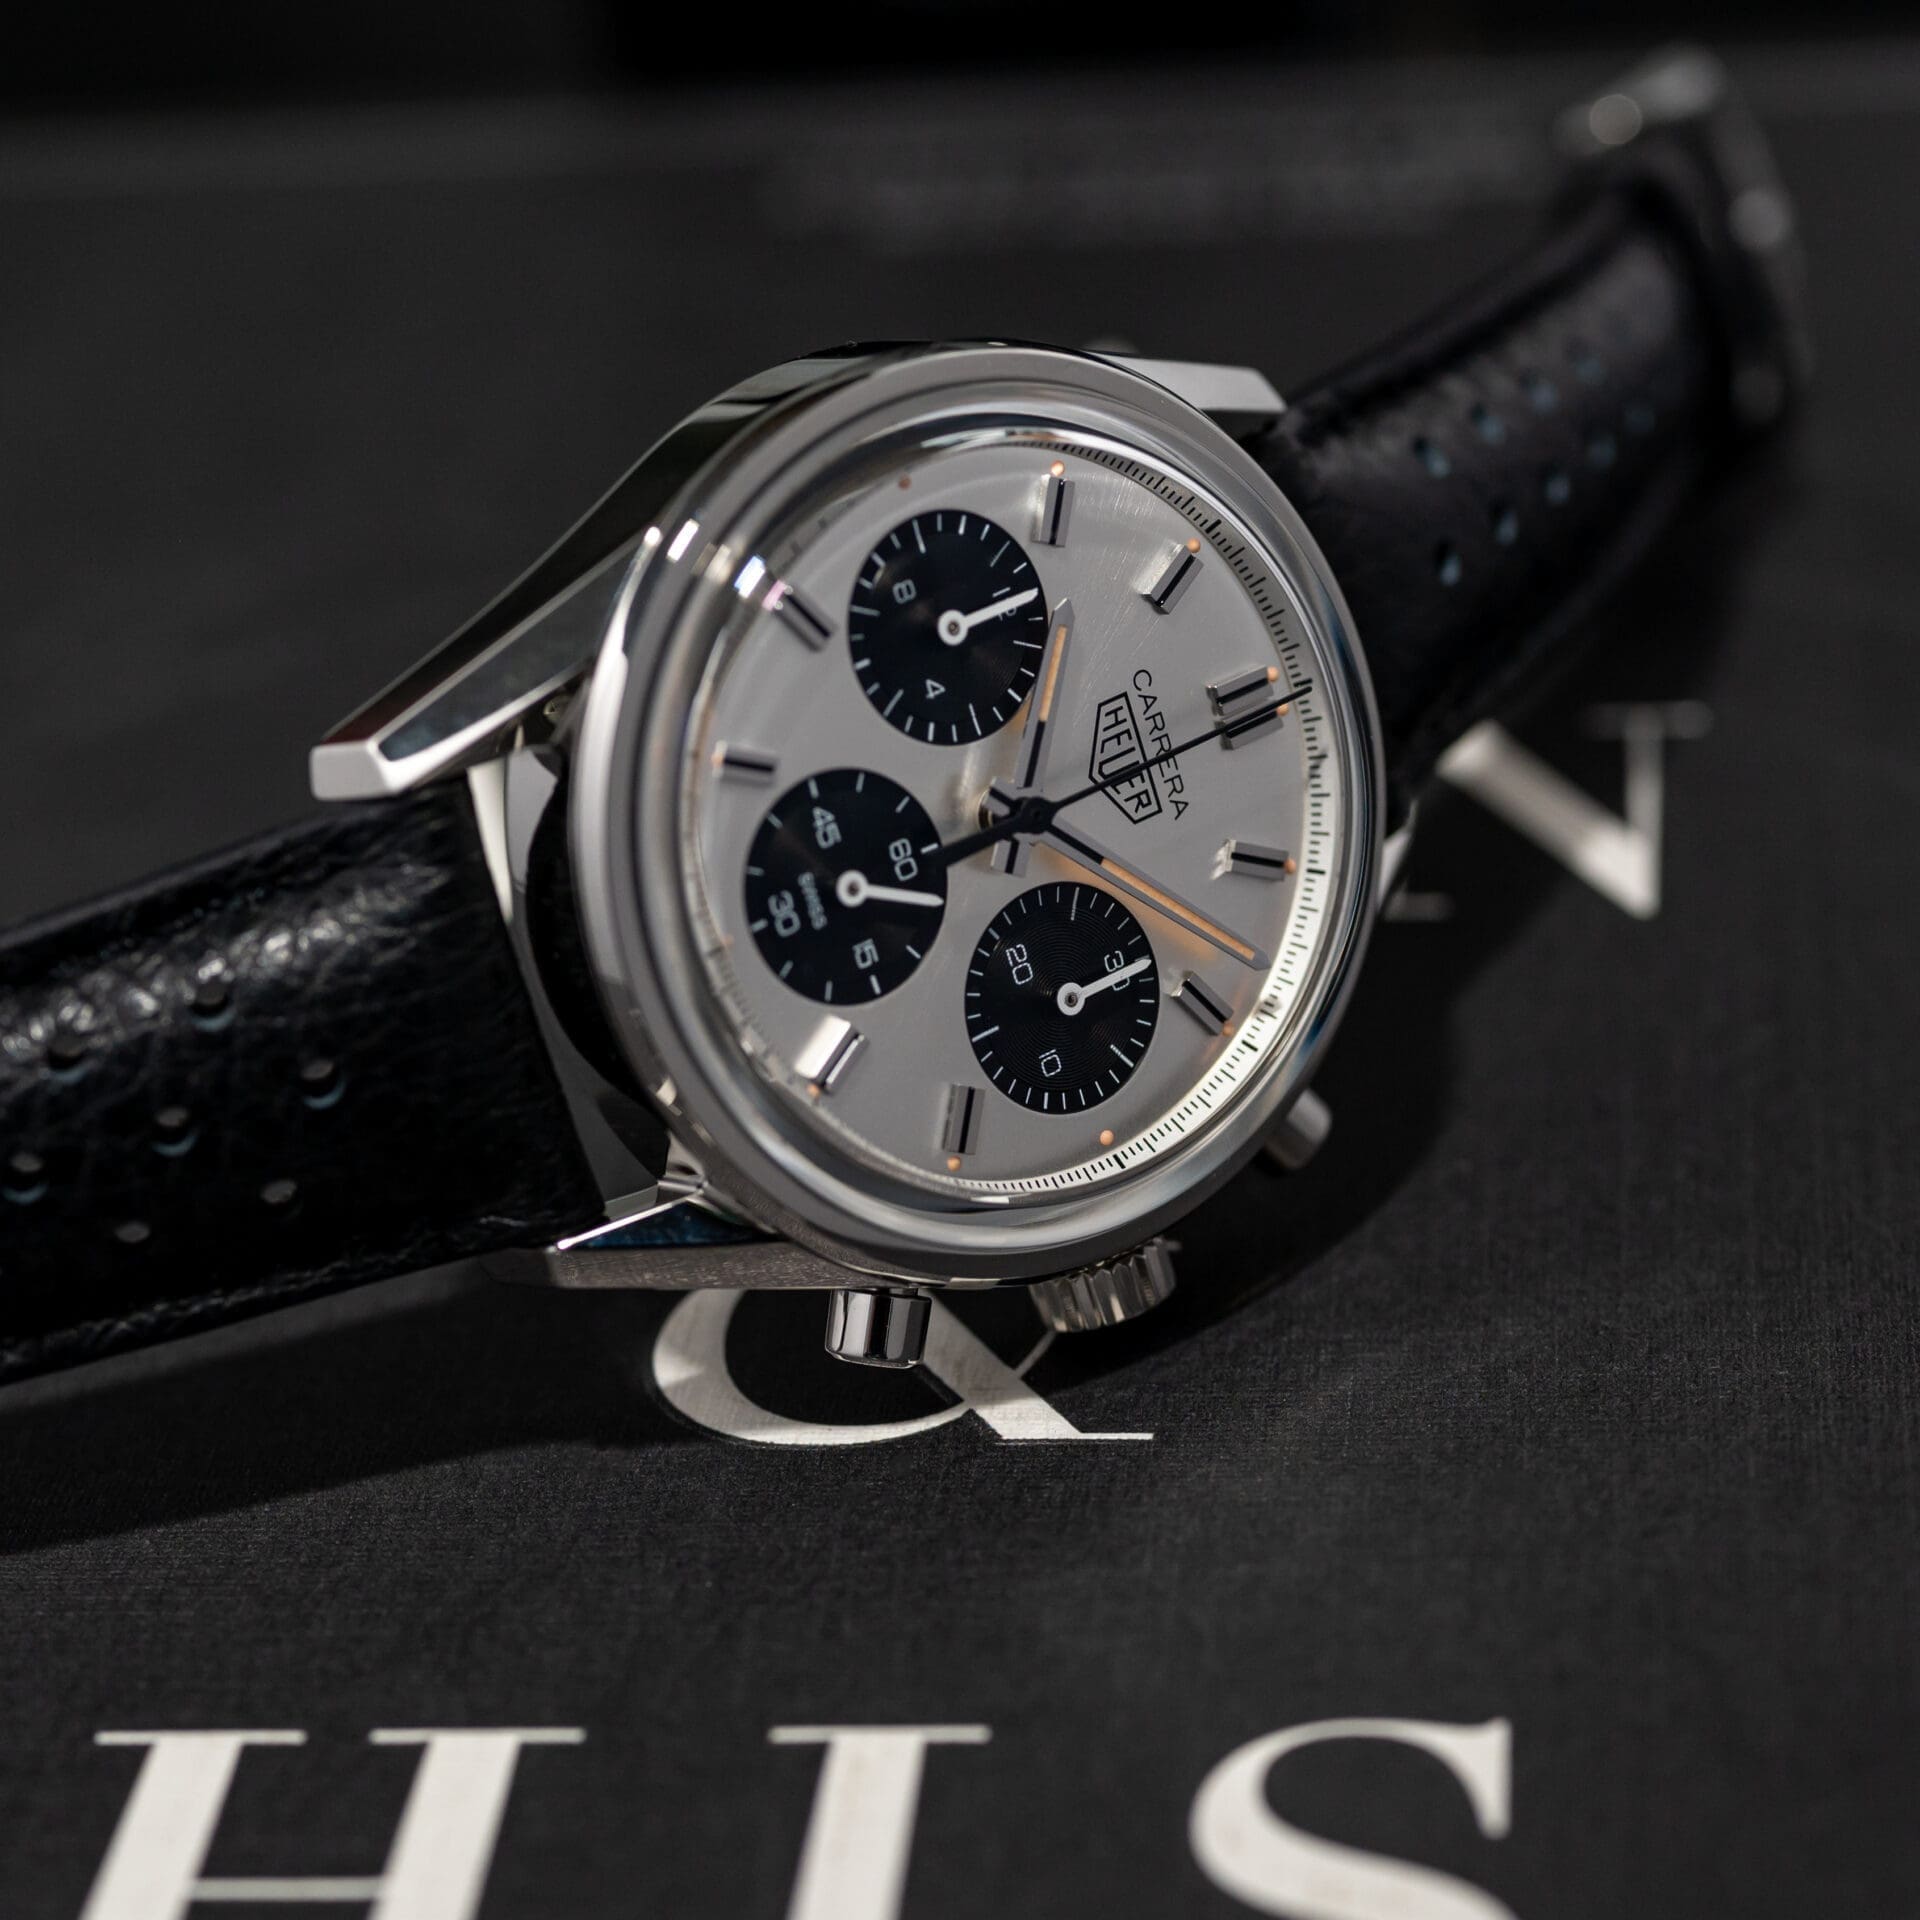 History and tradition meet with the TAG Heuer Carrera 60th Anniversary